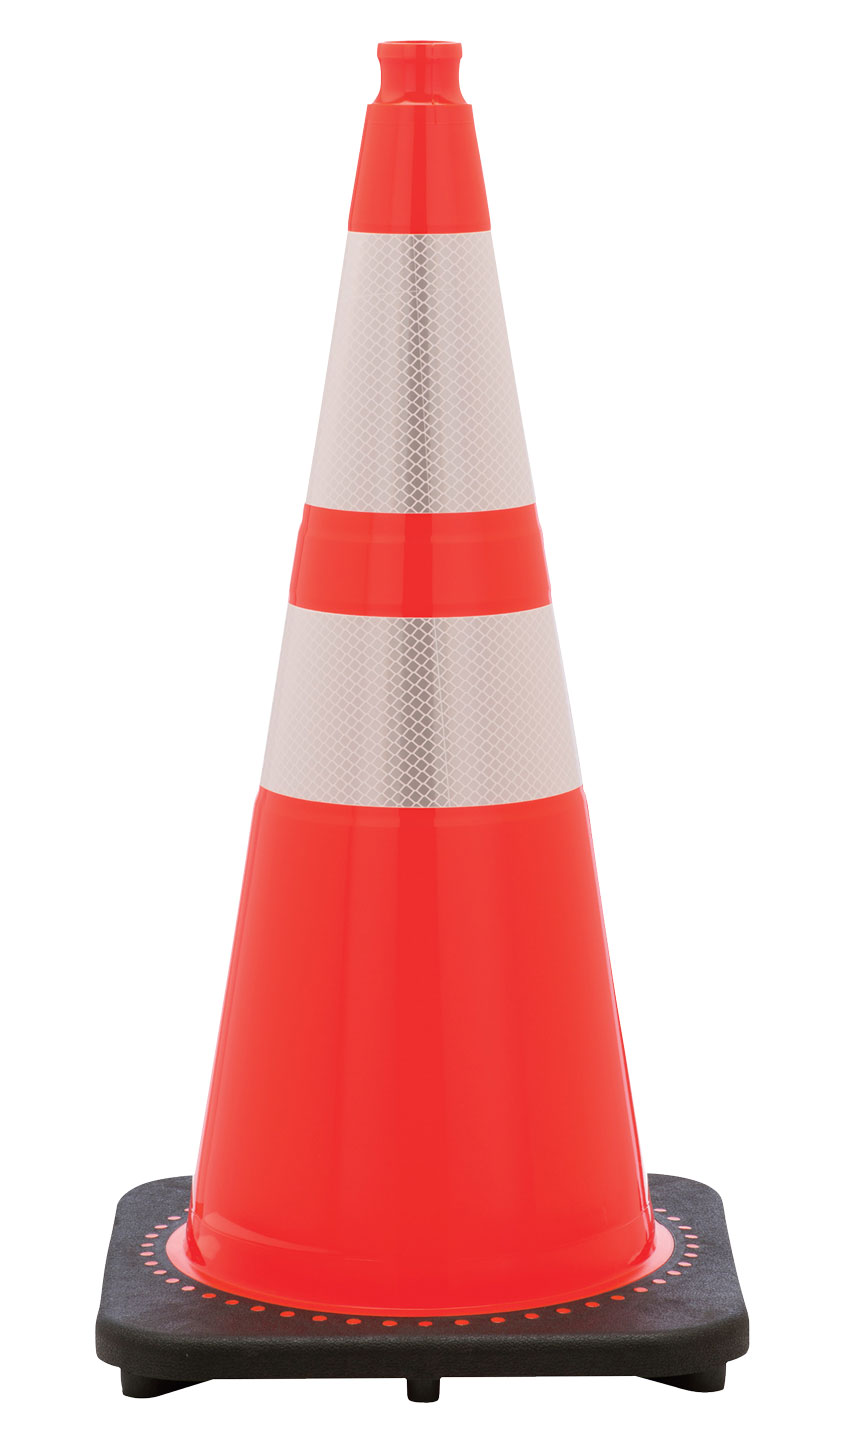 28 Orange Traffic Cone with Black Base and 3M Reflective Collars